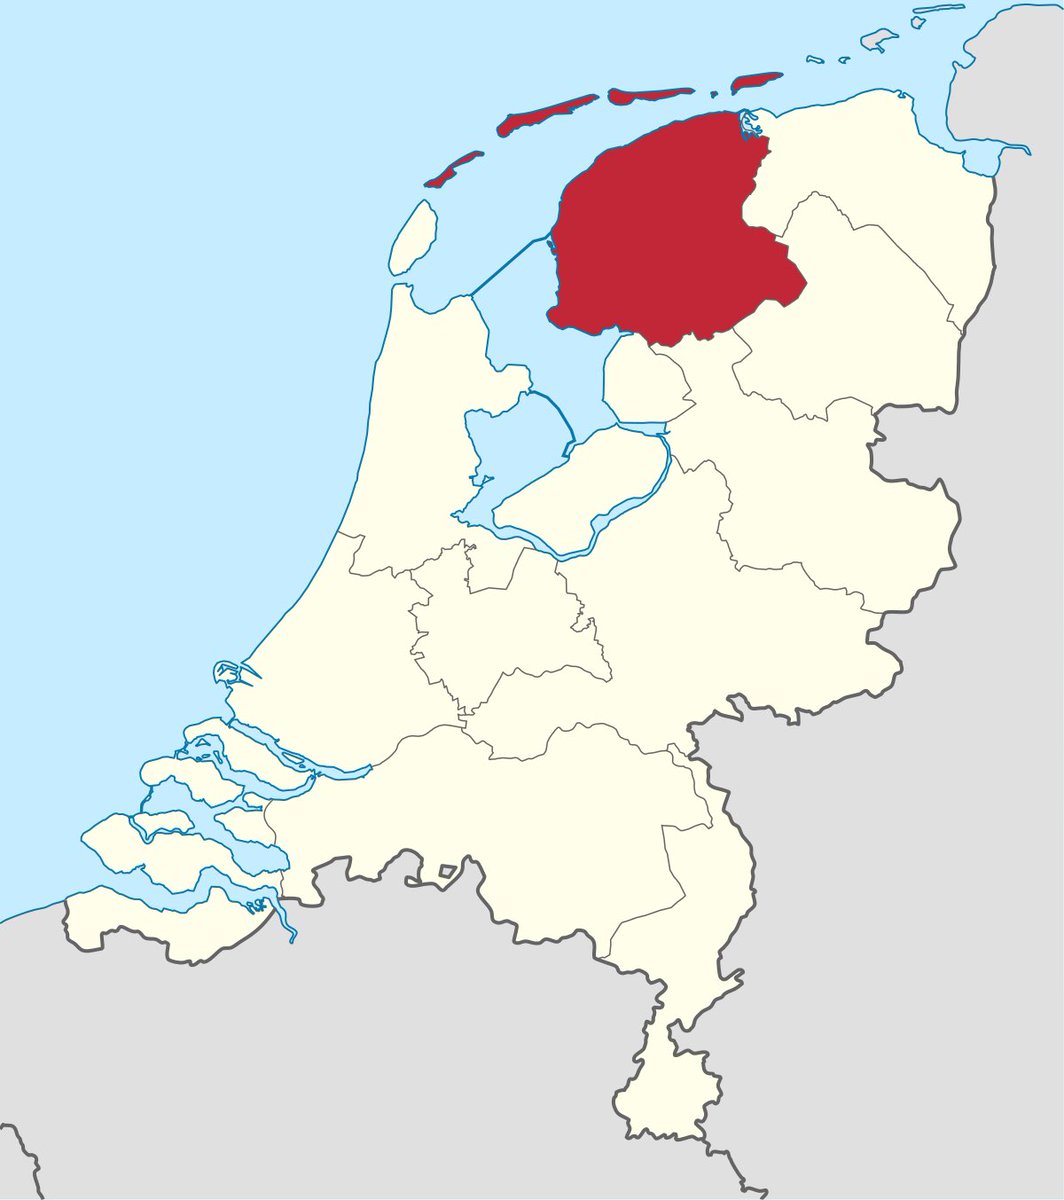 5. Friesland  * Have a fuck the Netherlands mentality which... an excellent take.  * White trash, wannabe vikings.  * Have their stupid own language that sounds even worse than Dutch.  * Like cockroaches. U can’t kill these hoes they keep on reproducing and fighting.